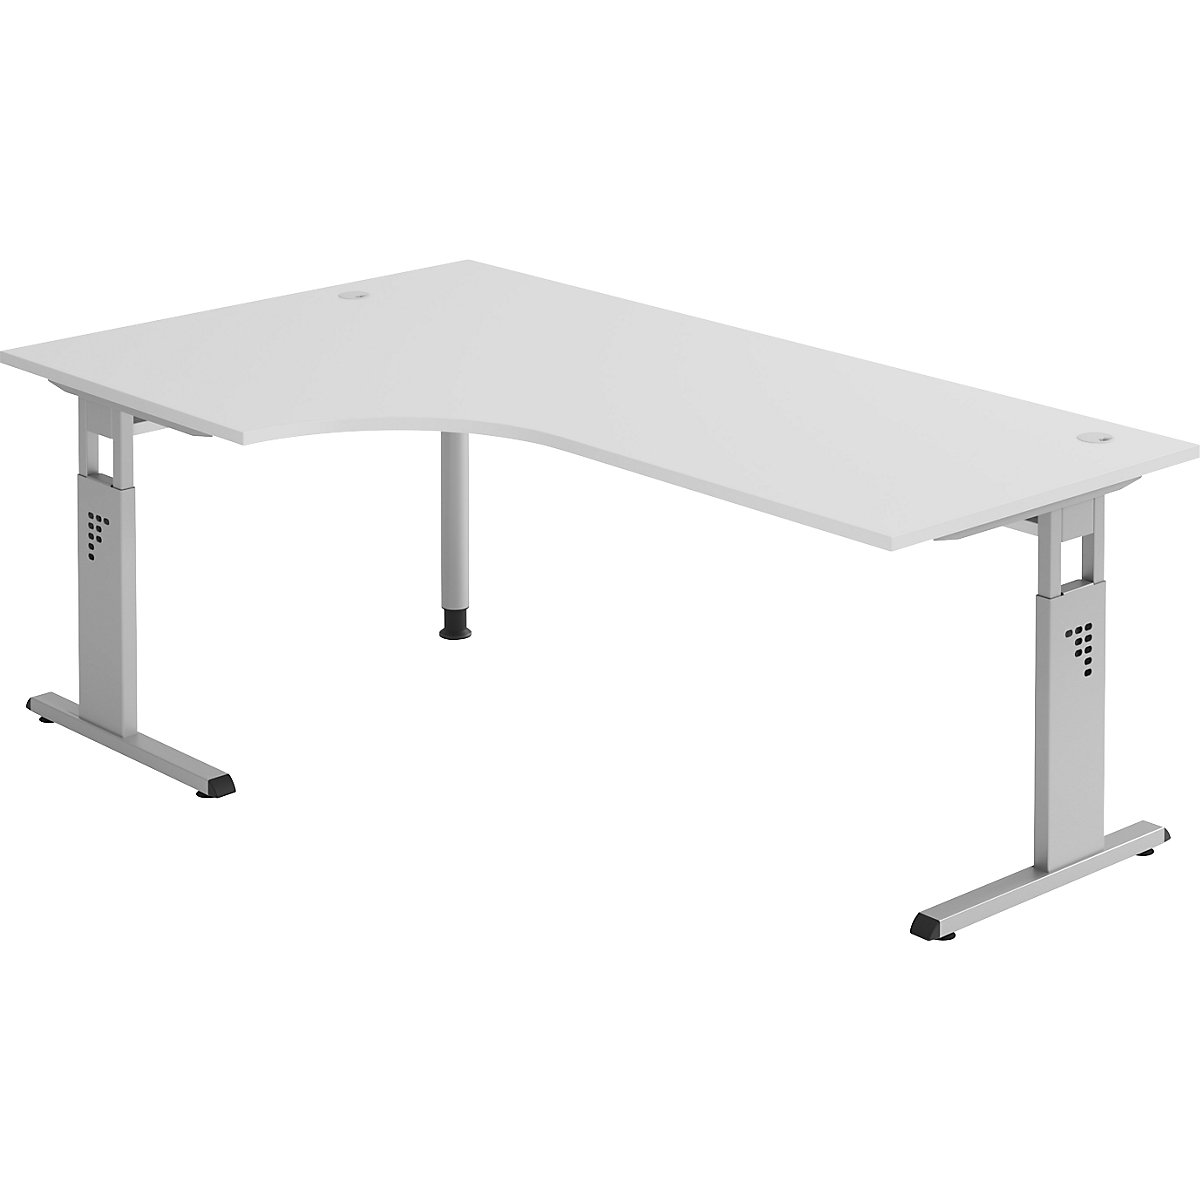 Free form table, height adjustable FINO, 680 – 760 mm, WxD 2000 x 1200 mm, light grey-7